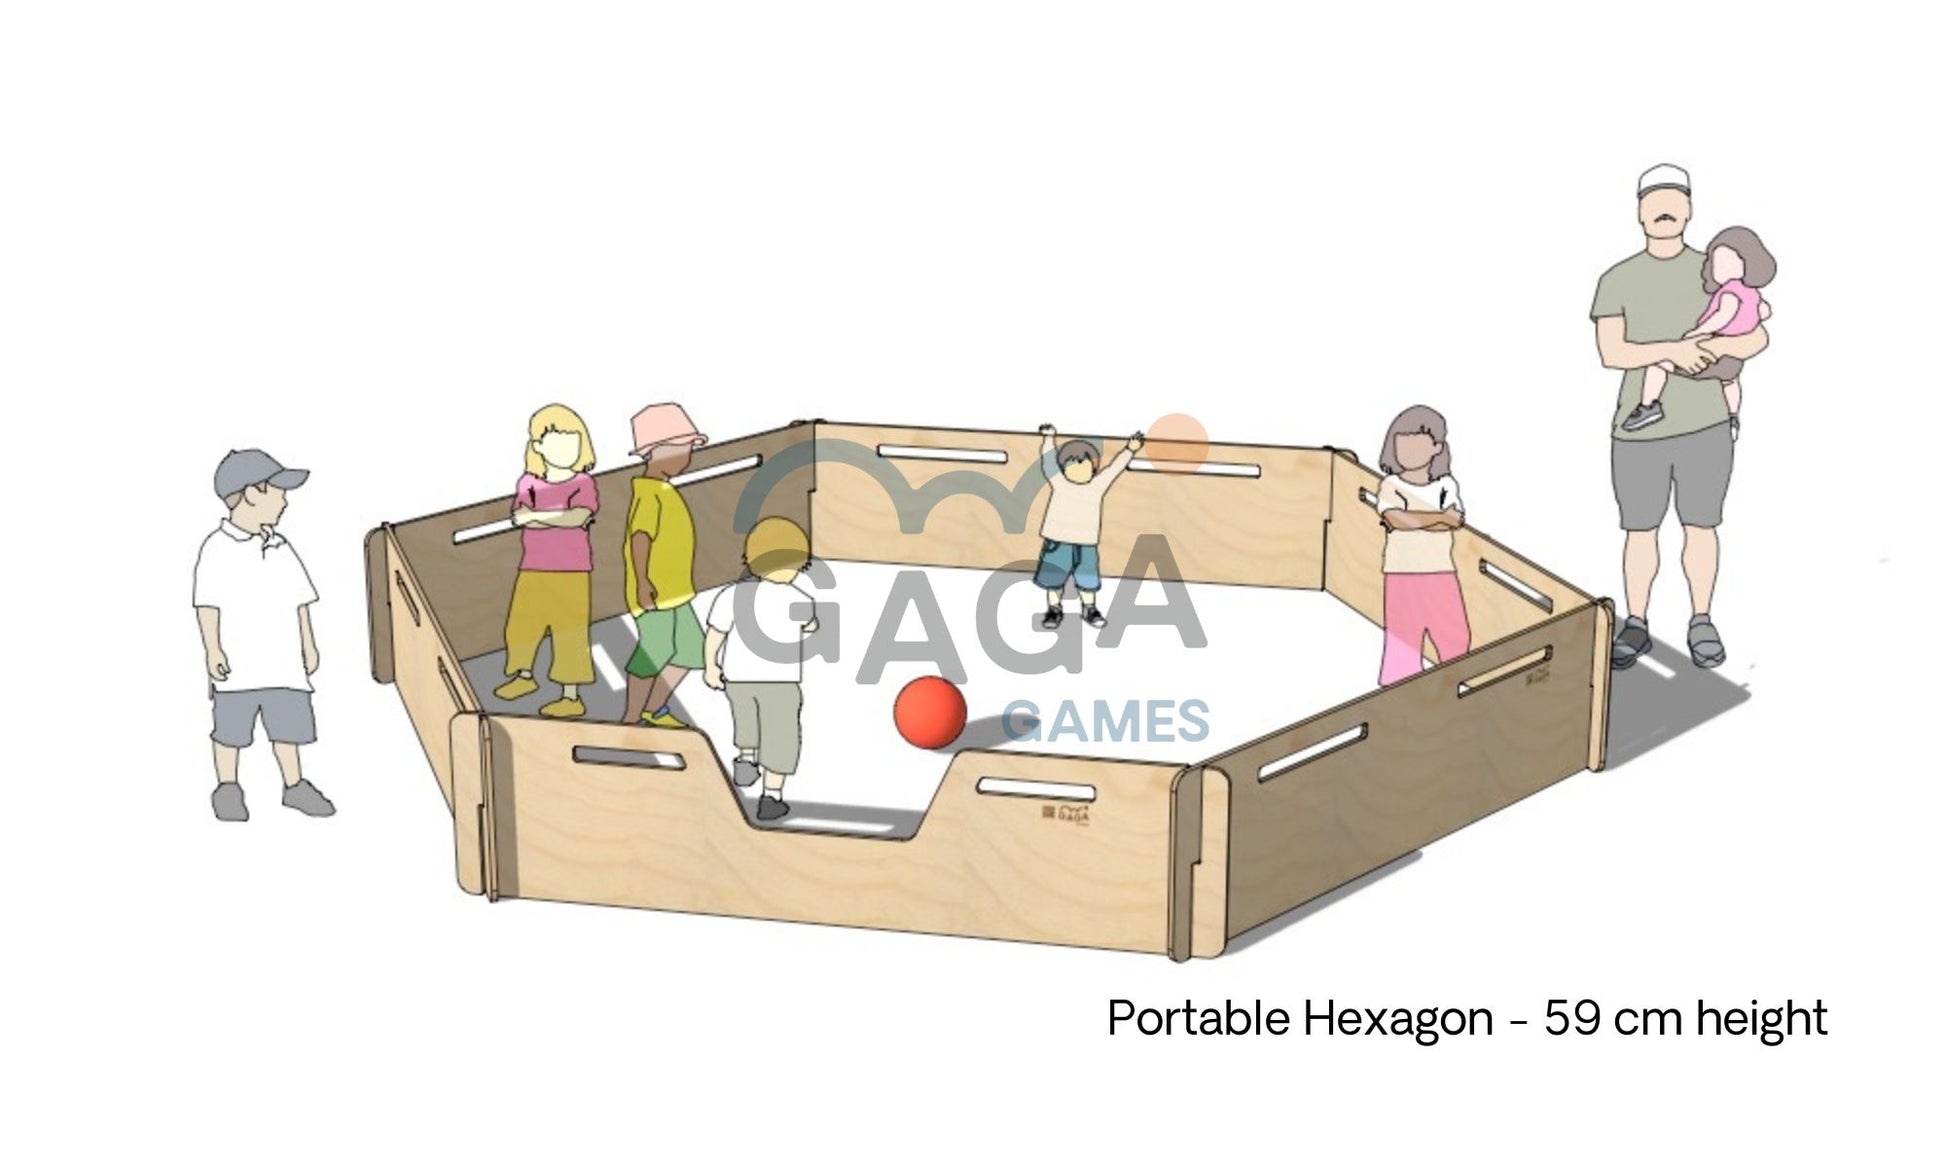 Introducing the 59cm Hexagonal Portable Gaga Pit - the perfect tool for building confidence and resilience through the fun and exciting game of Gaga Ball. Great for events and parties, made in Australia and delivered Australia-wide.